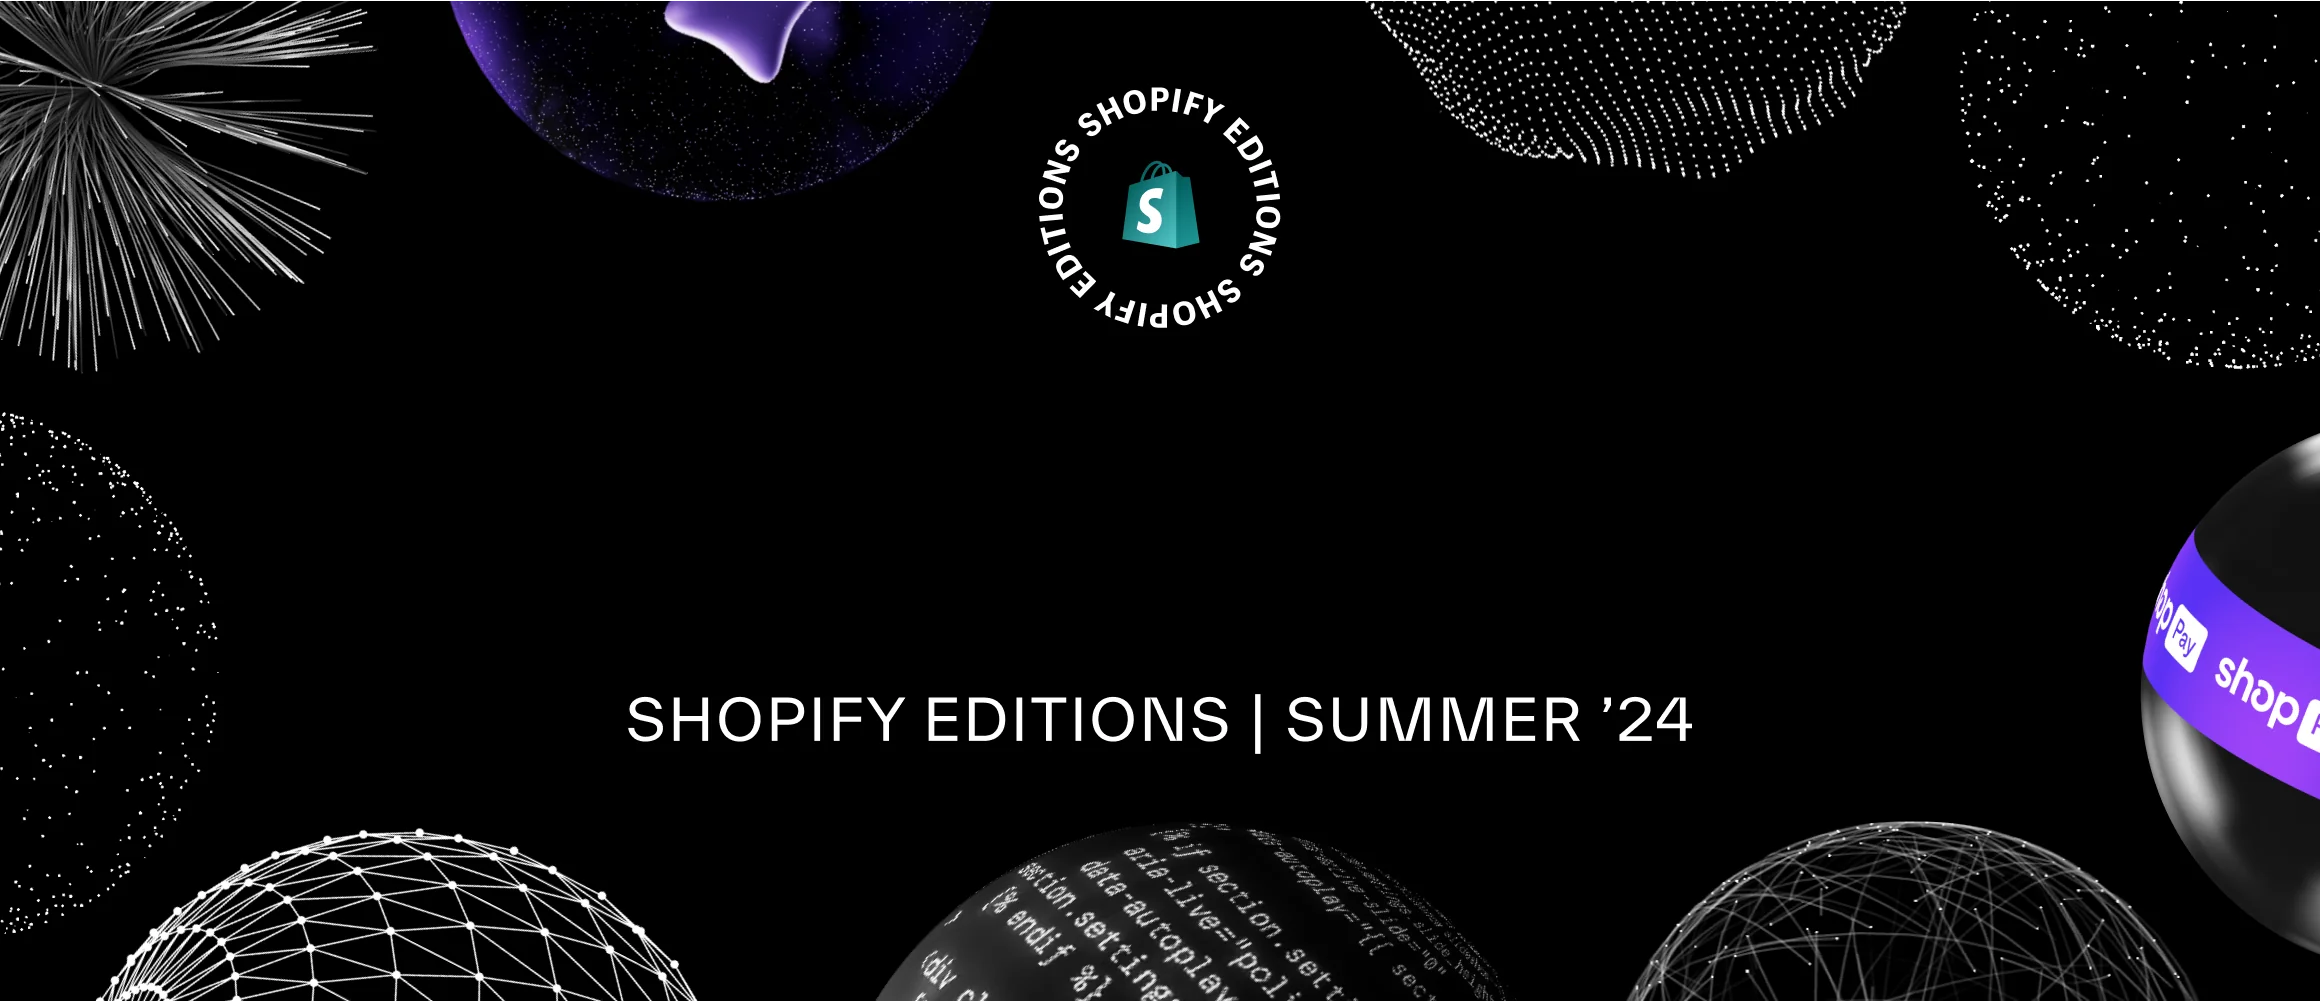 Shopify Summer ’24 Edition: A Breakdown on the Revolutionary Update